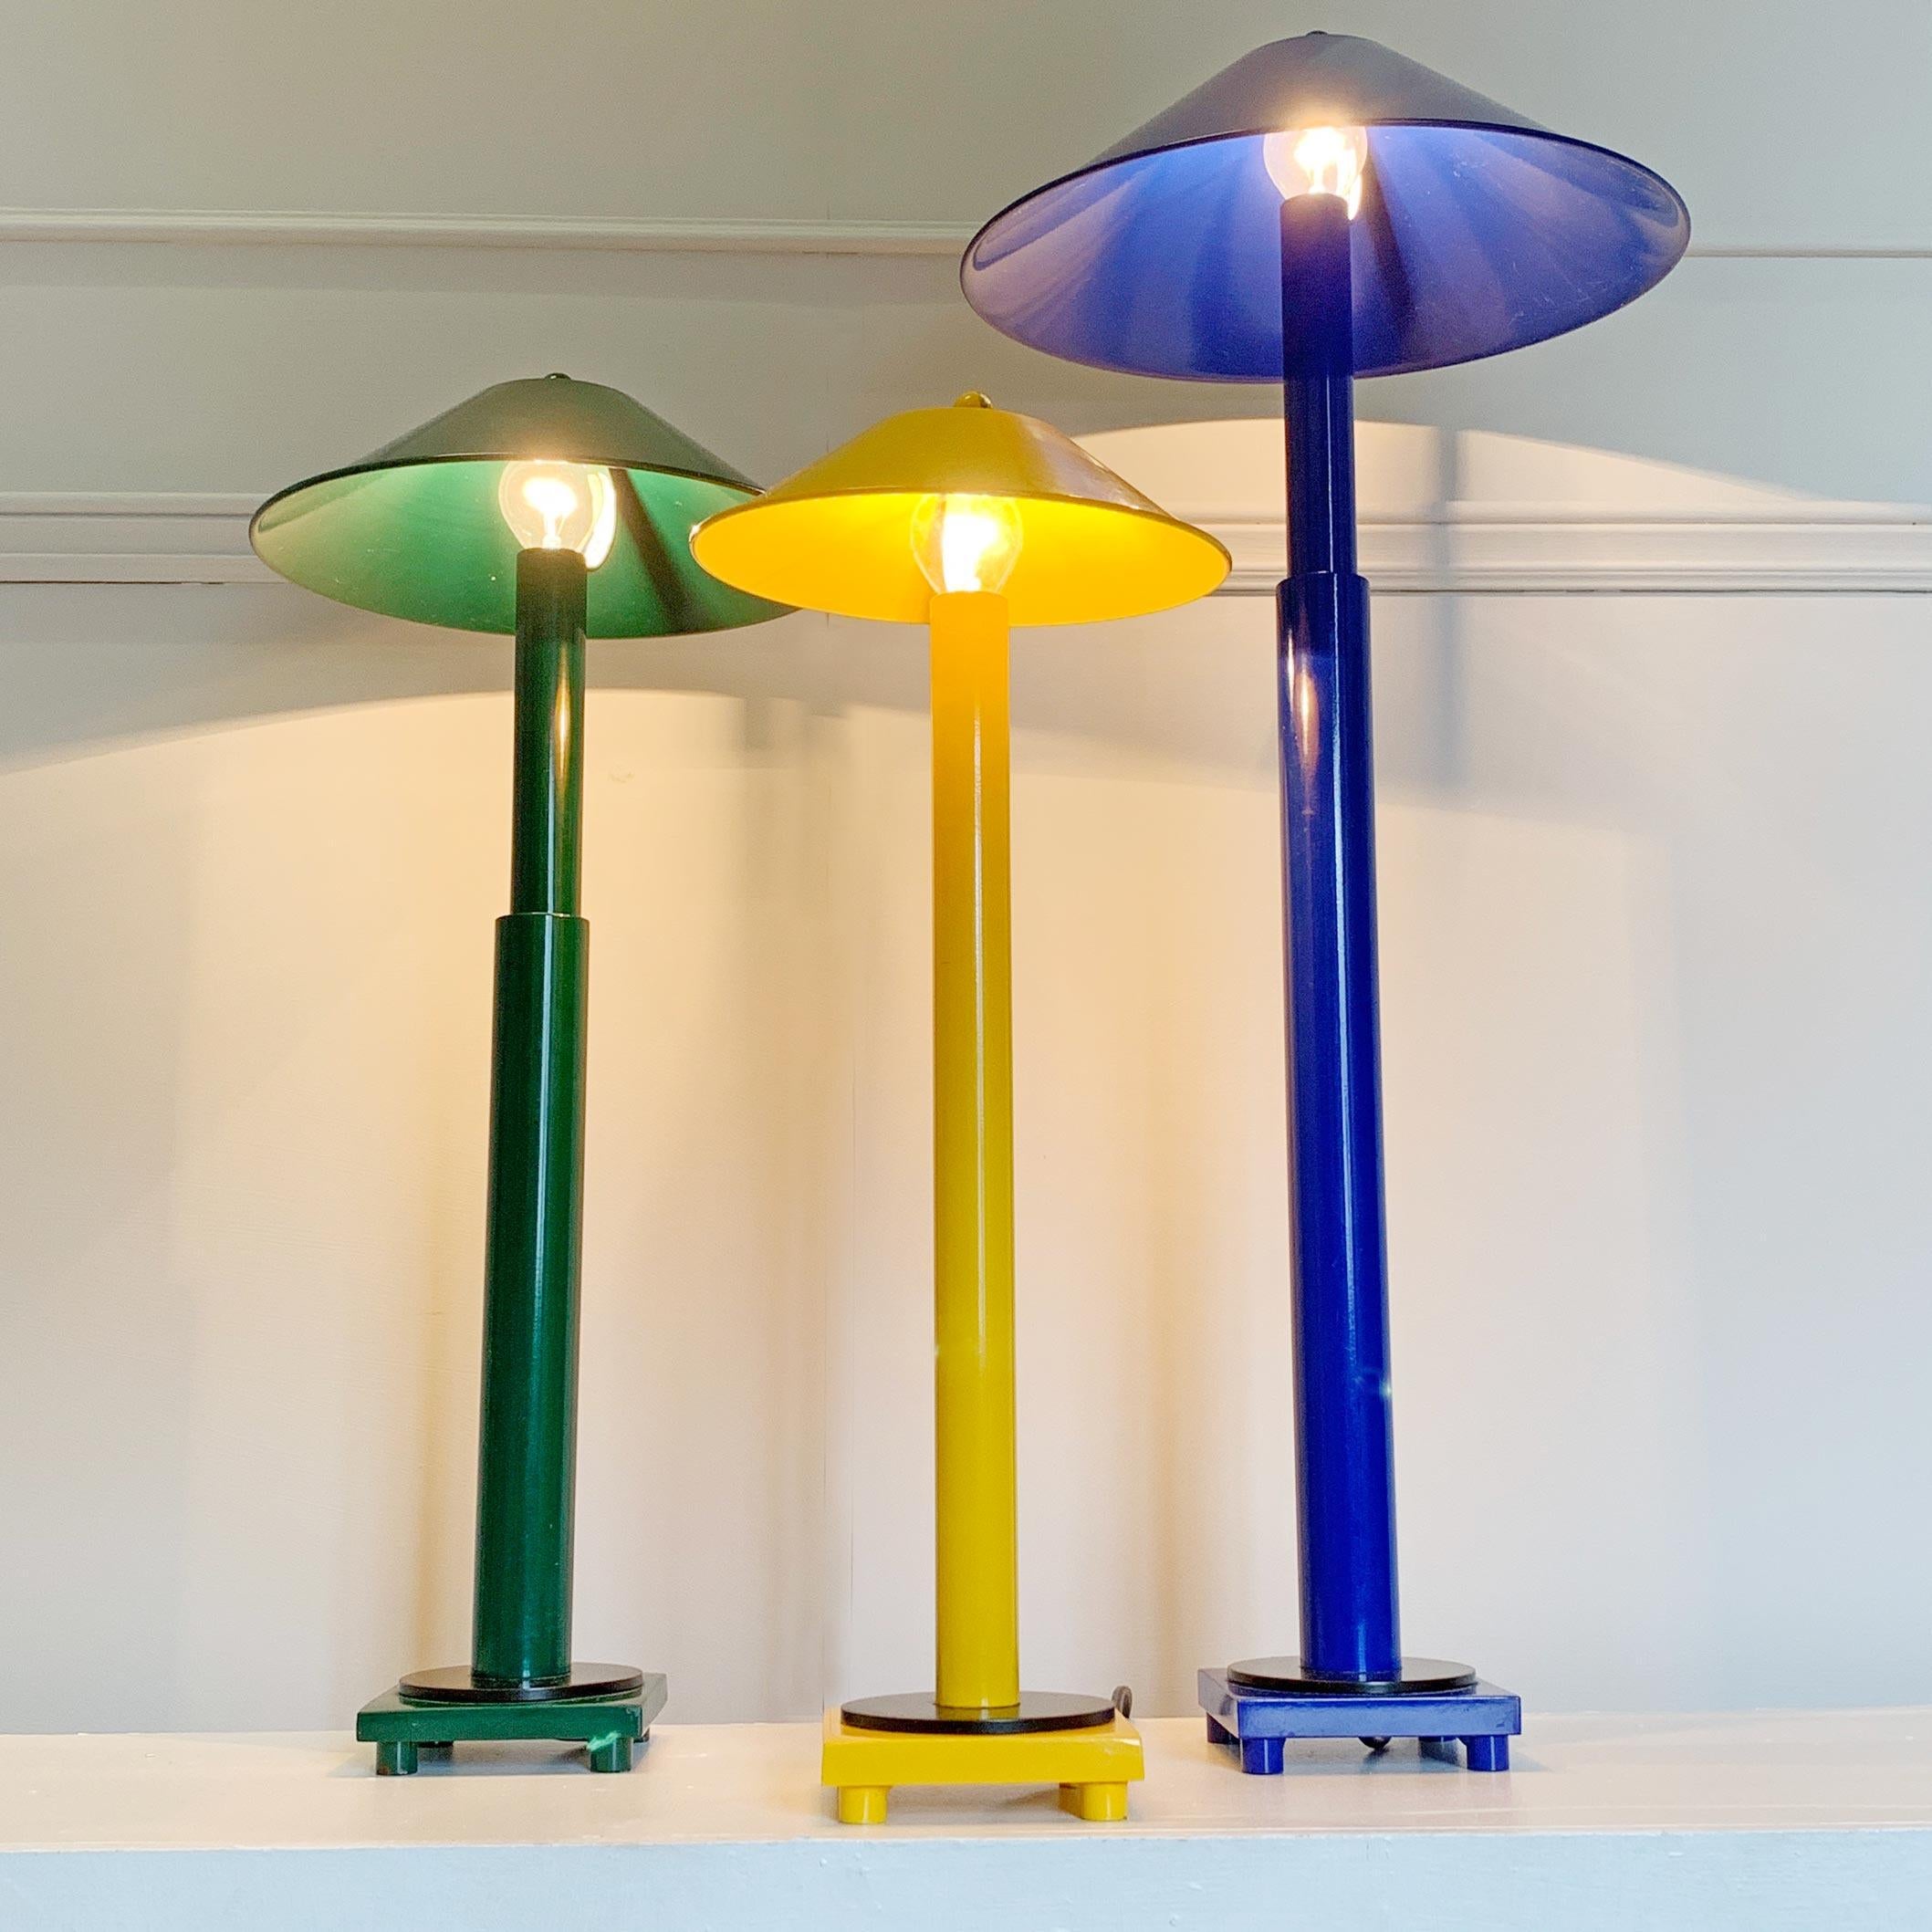 Set of 3 Kostka Lamps
France, 1970s-1980s

De Stijl Movement Style
Attributed to the early 20th century designs of German Architect and Painter Walter Georg Kostka (1884-1970)
Set of 3 primary bright colored table lamps
Heavy metal lamp bases